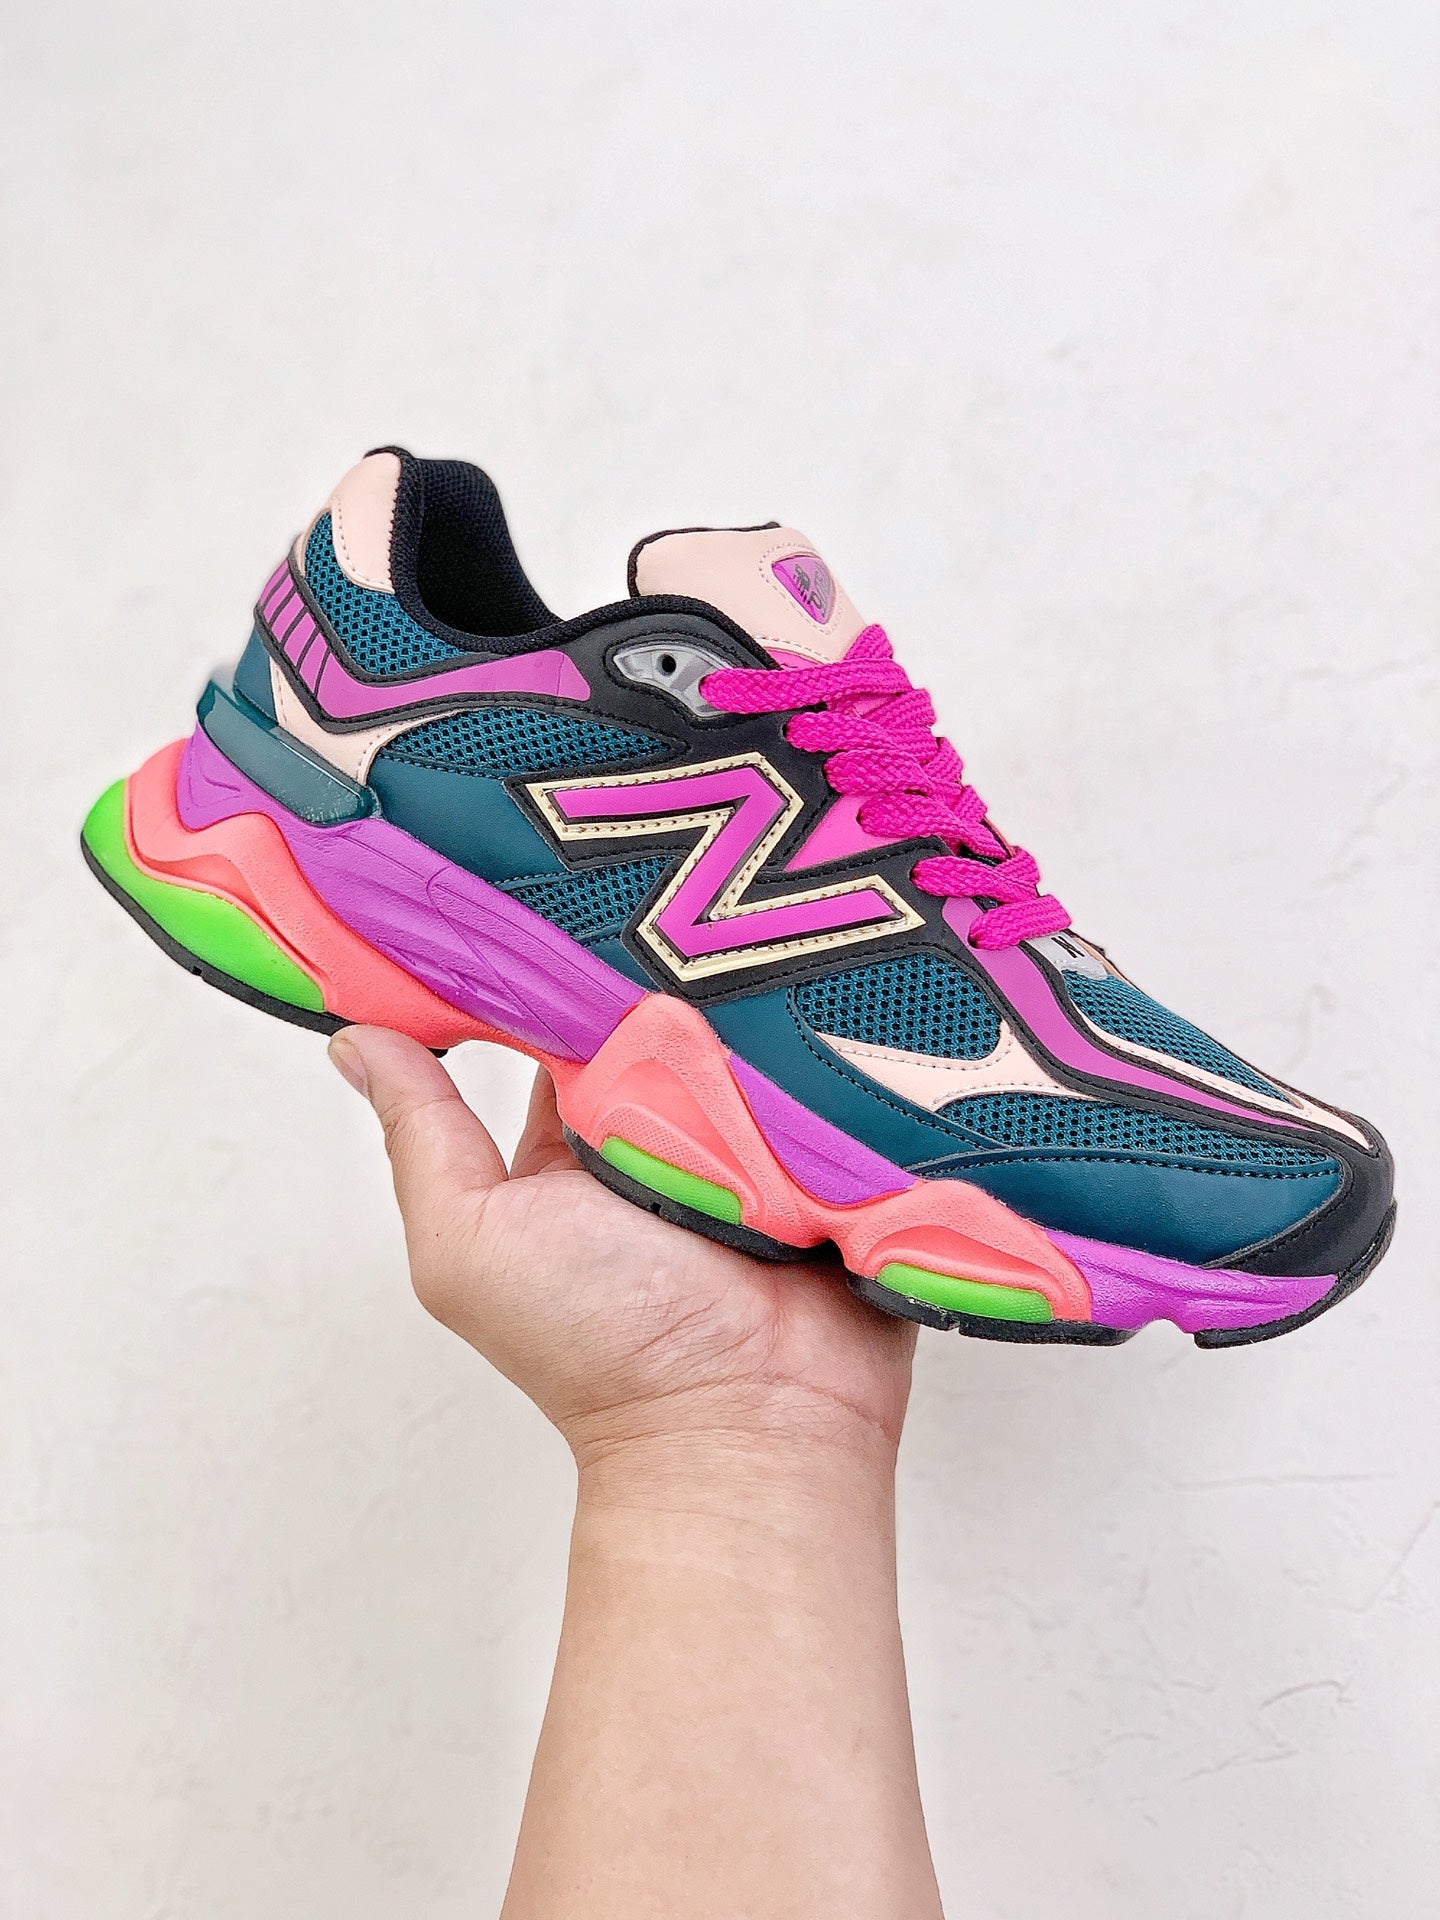 New Balance NB 9060 Nave and colors